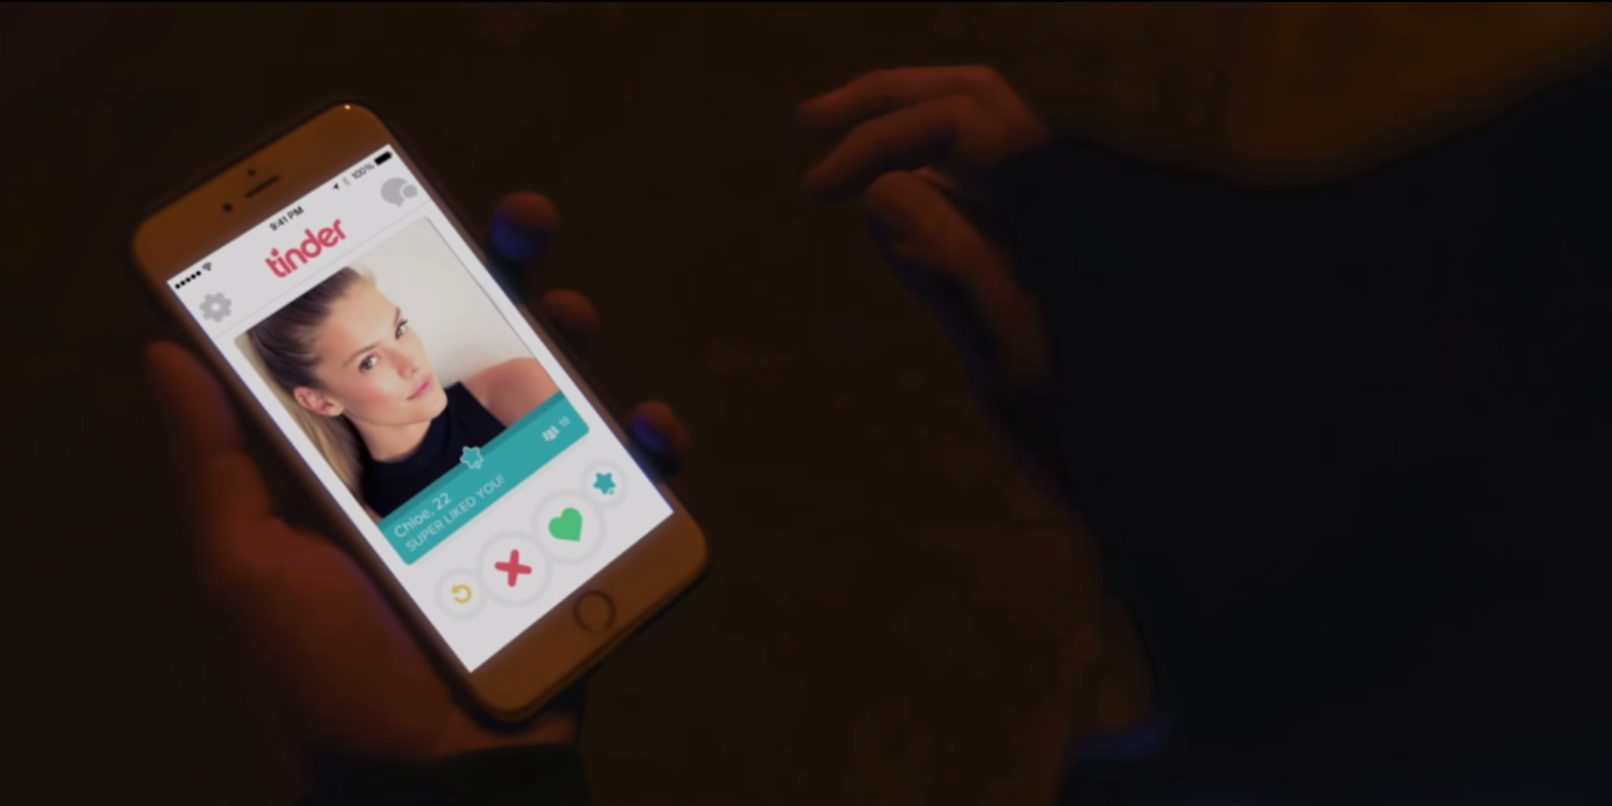 Essentials Facts To Know Before Using Tinder